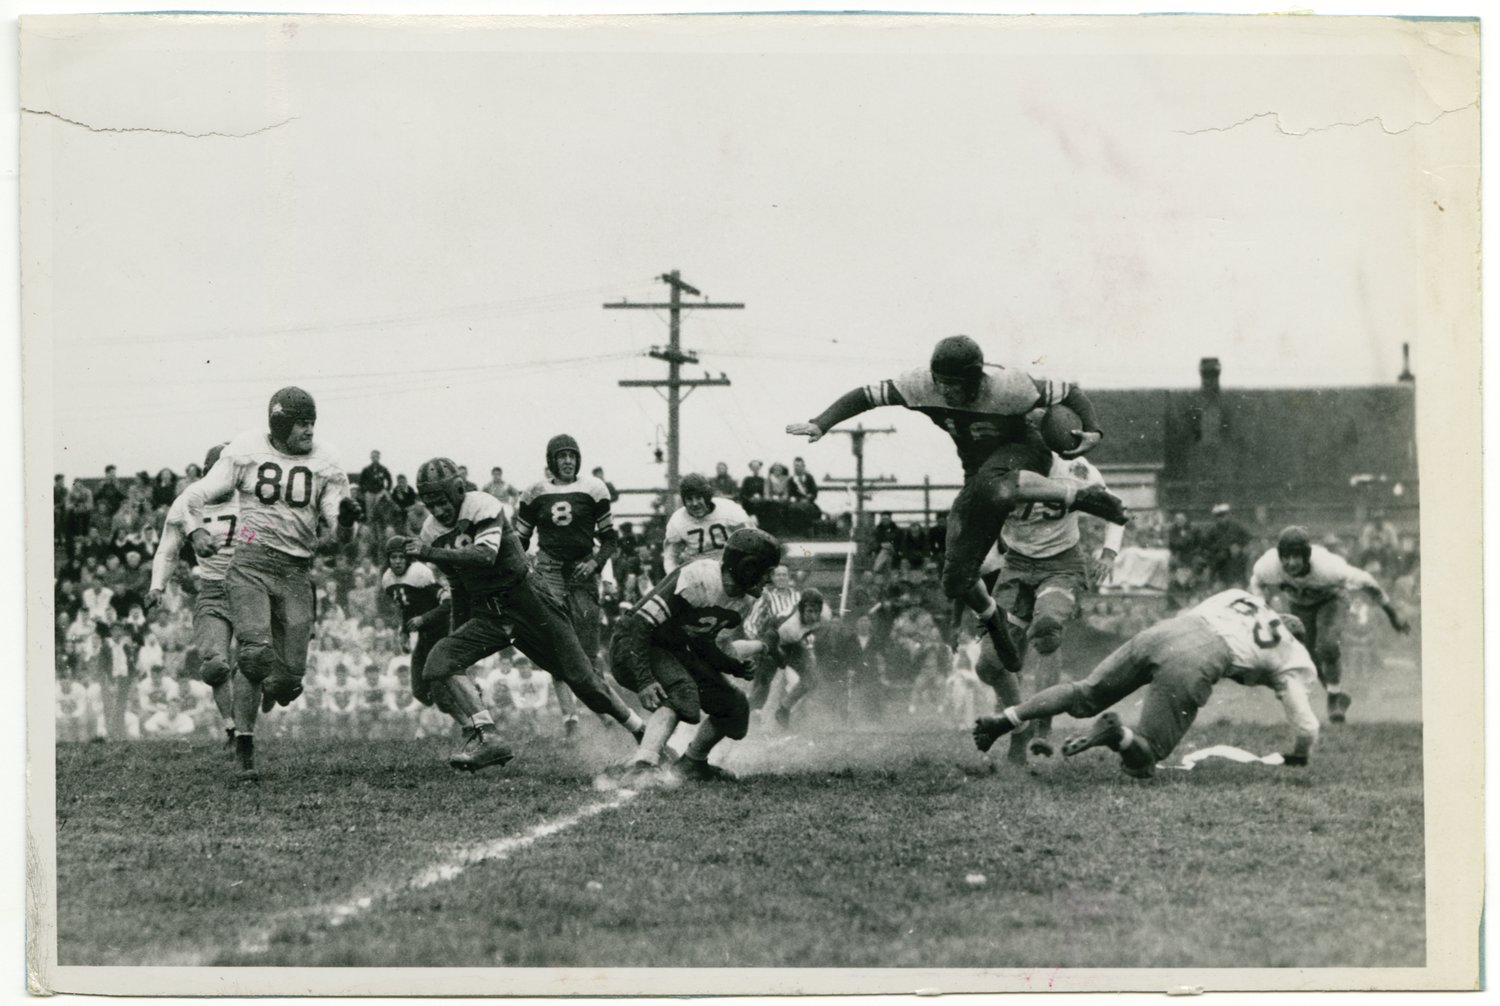 Chimacum fullback Jim Parker (16) leaps over Townsend defensive player Don Lindley (65), as Townsend team captain Don Brecht (80) draws a bead on Parker. Game played at Flint Field Sept. 20, 1946.